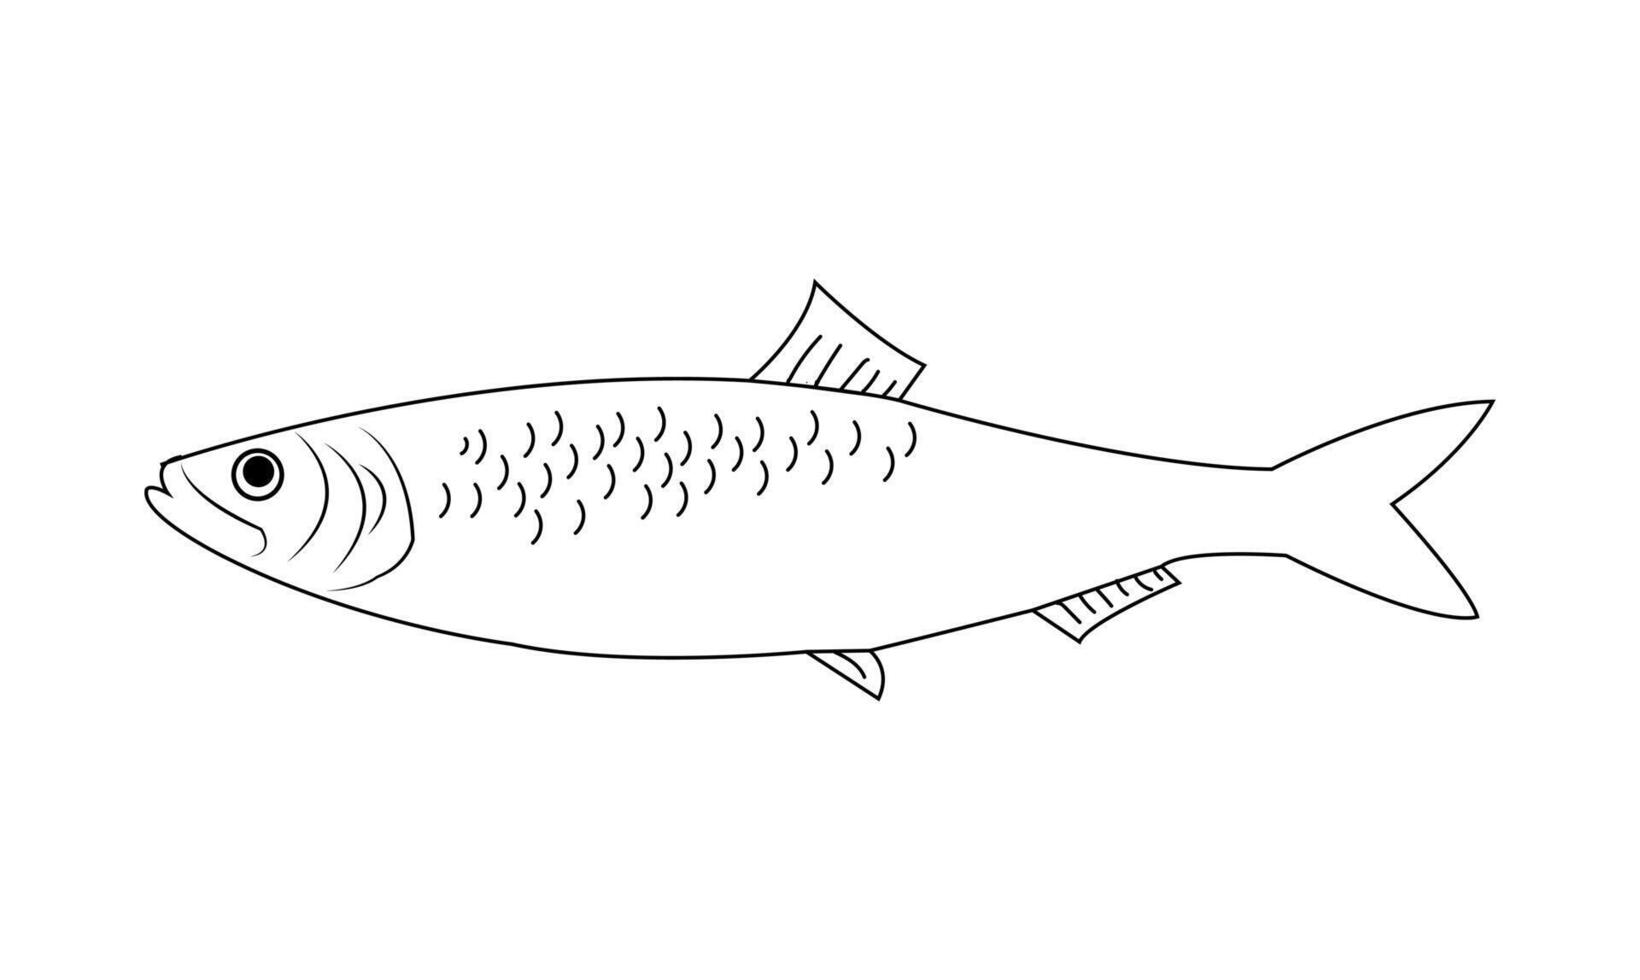 Fish vector illustration. Sea animal coloring book or page for children